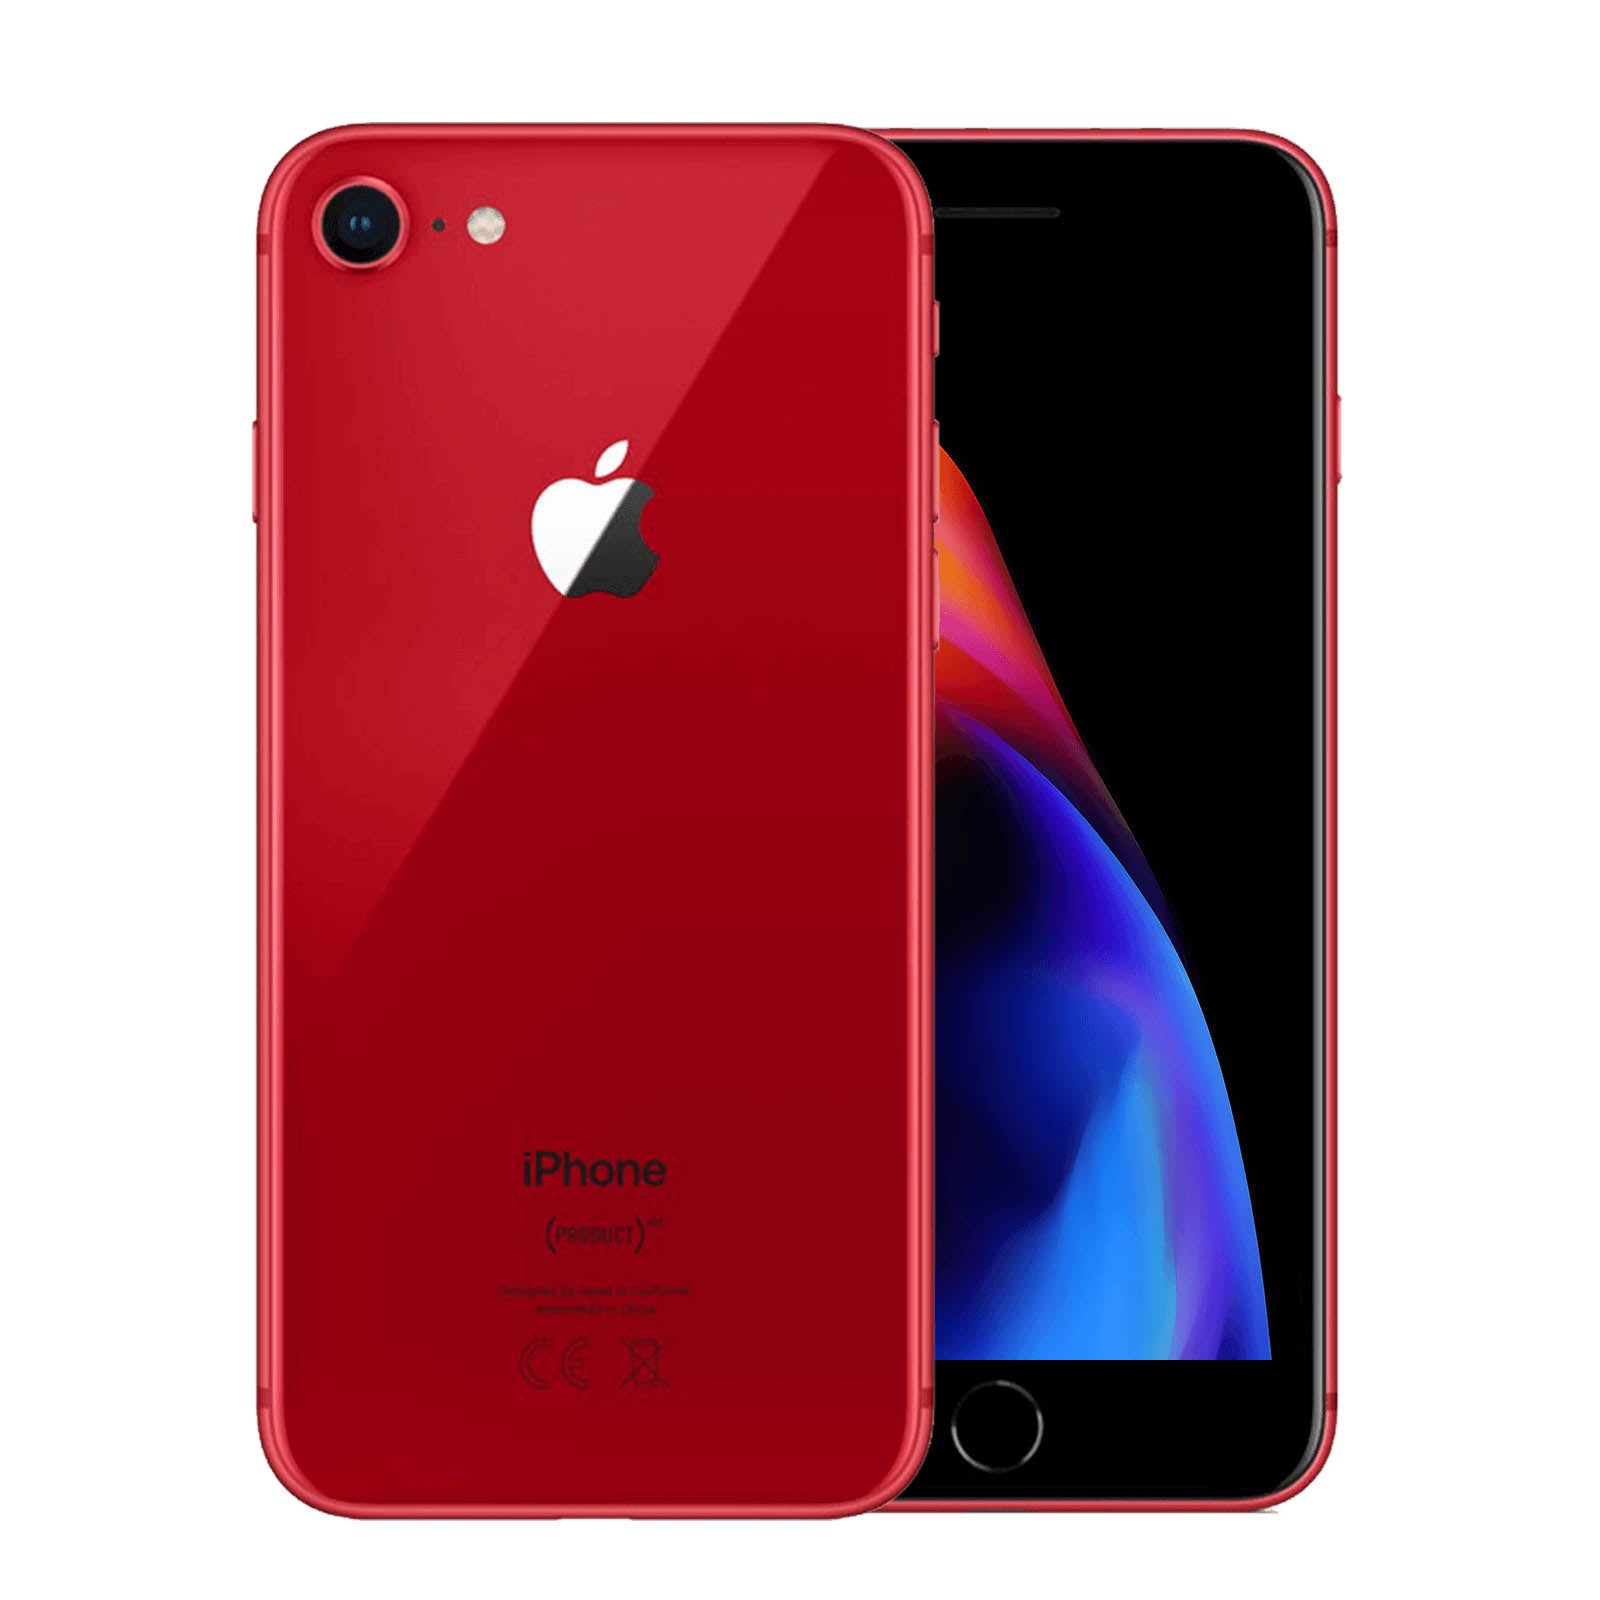 Apple iPhone 8 128GB Product Red Very Good - Unlocked